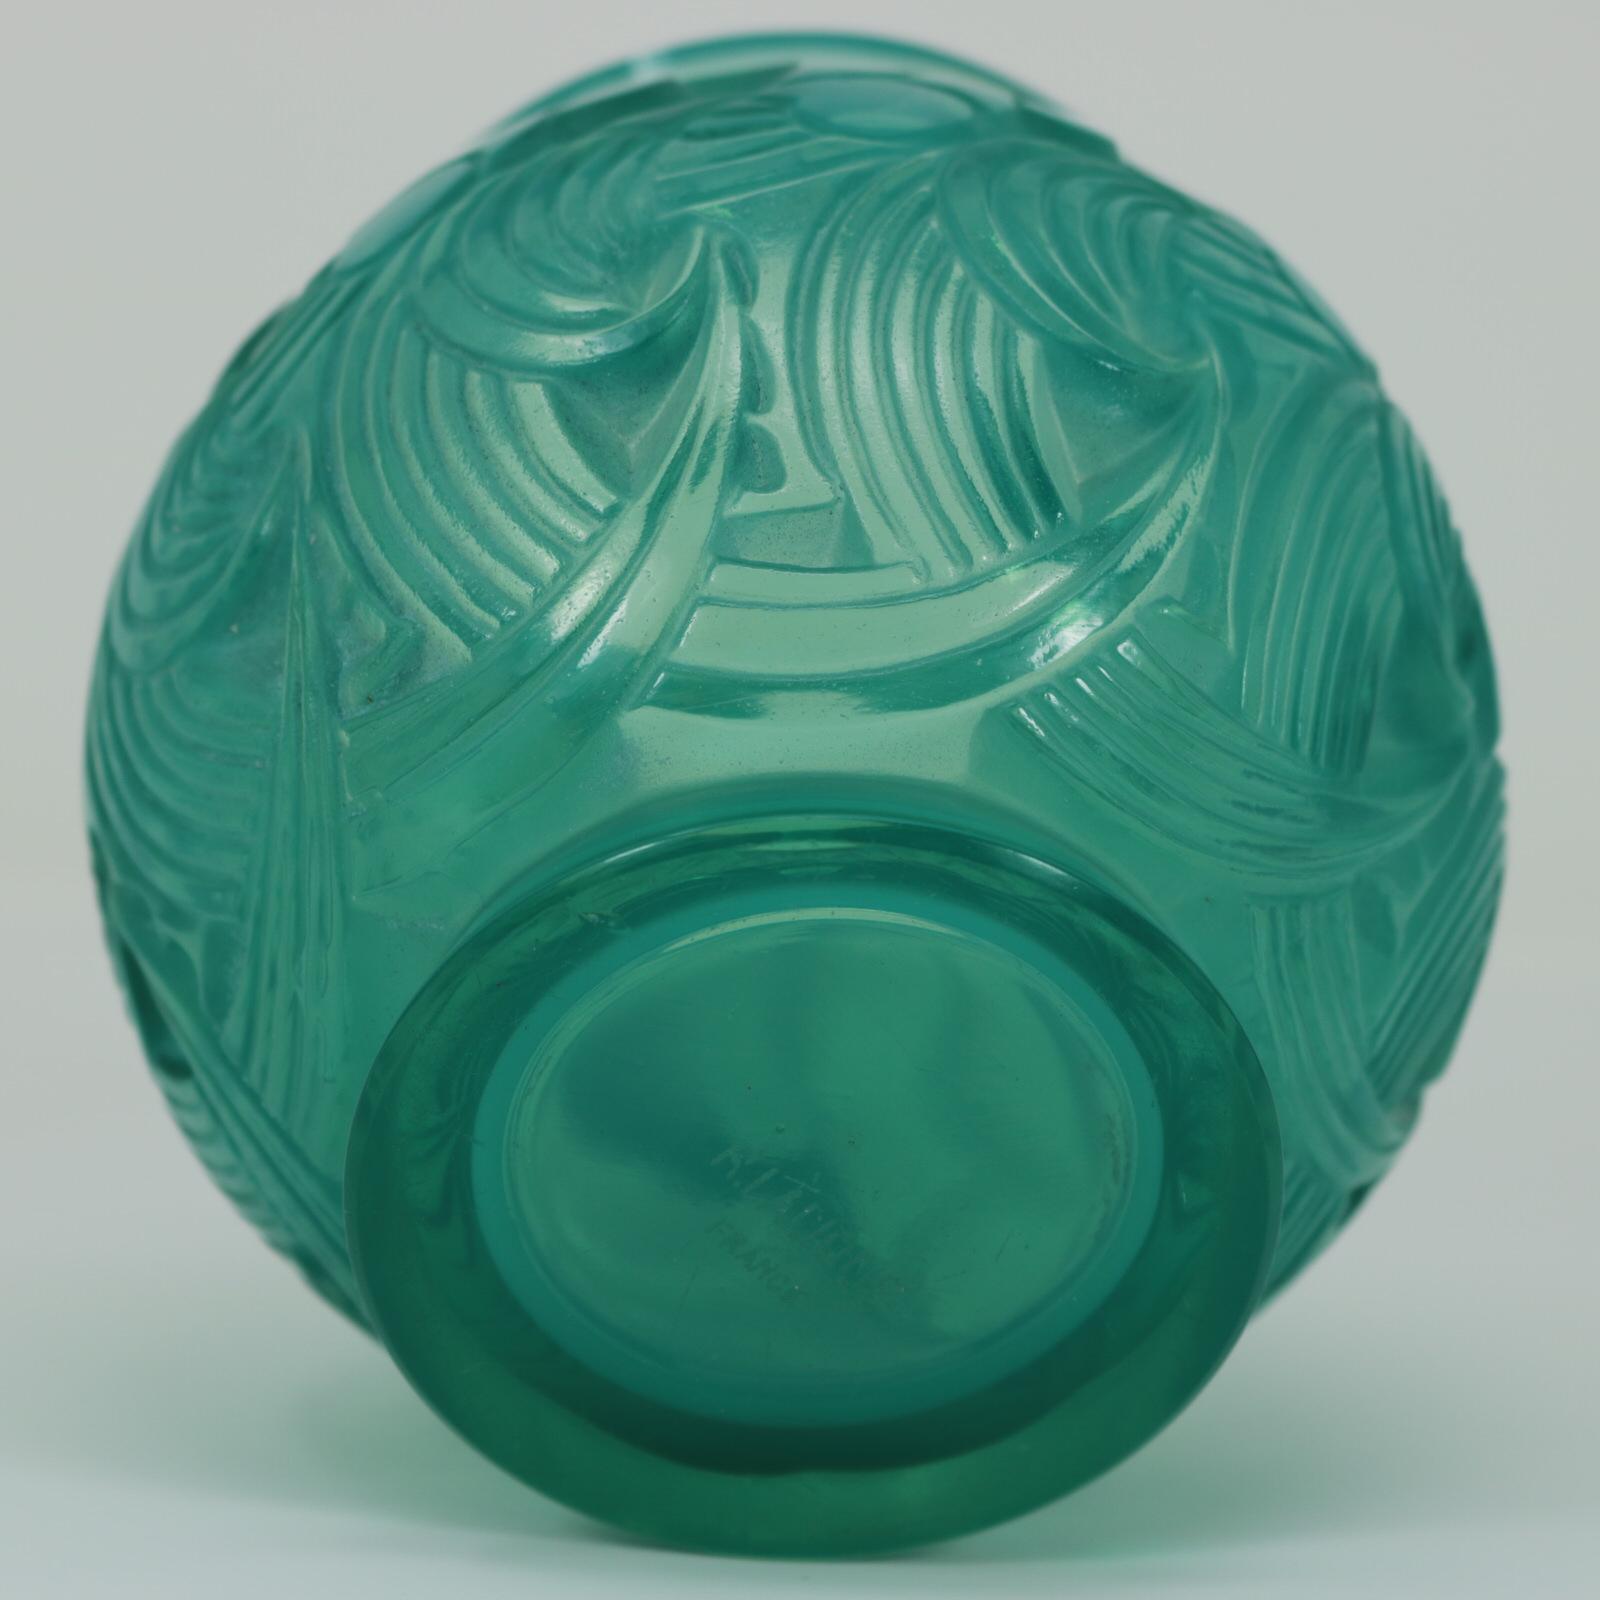 Rene Lalique Opalescent Mint Coloured Glass 'Le Mans' Vase In Good Condition For Sale In Chelmsford, Essex